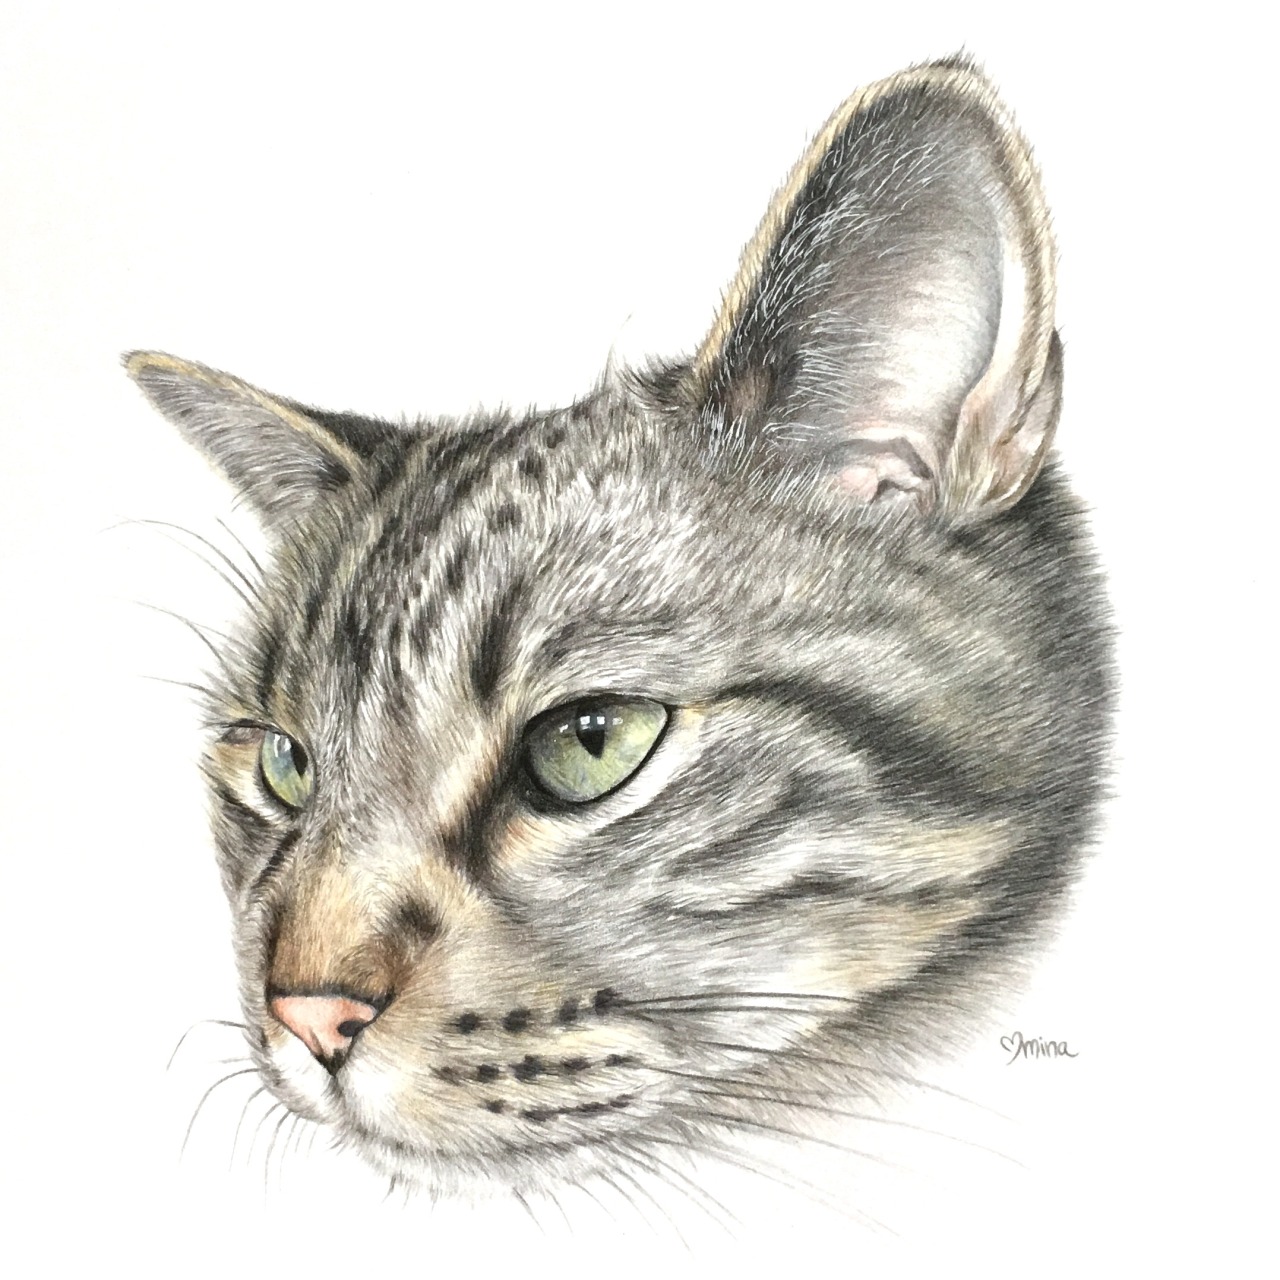 “Miri the Cat” by Mina Fordyce 100% of the proceeds from this custom colored pencil pet portrait were directly donated to Balanced Bullies Rescue & Rehabilitation in Monroe, WA. instagram.com/minafordyce facebook.com/minafordyceart